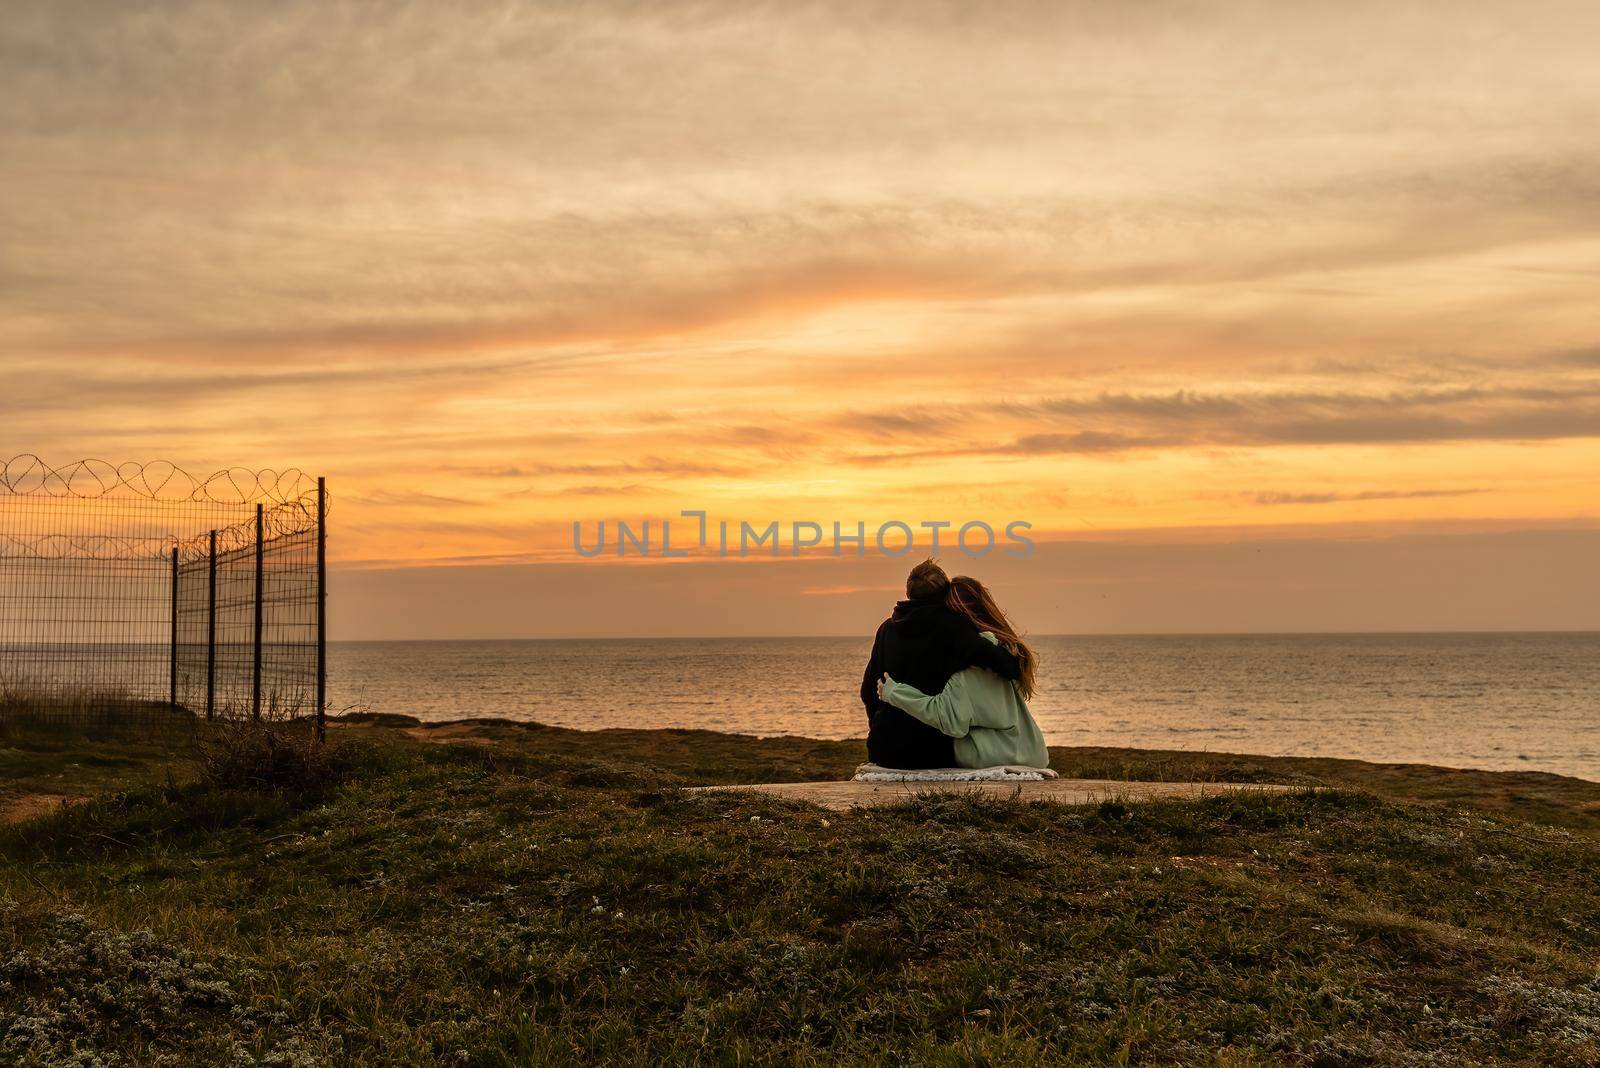 Portraits of lovers, romantic couple of lovers hugging, kissing, touching, eye contact at sunset, sunrise against the background of the sea, sun, clouds in fiery red, orange colors.